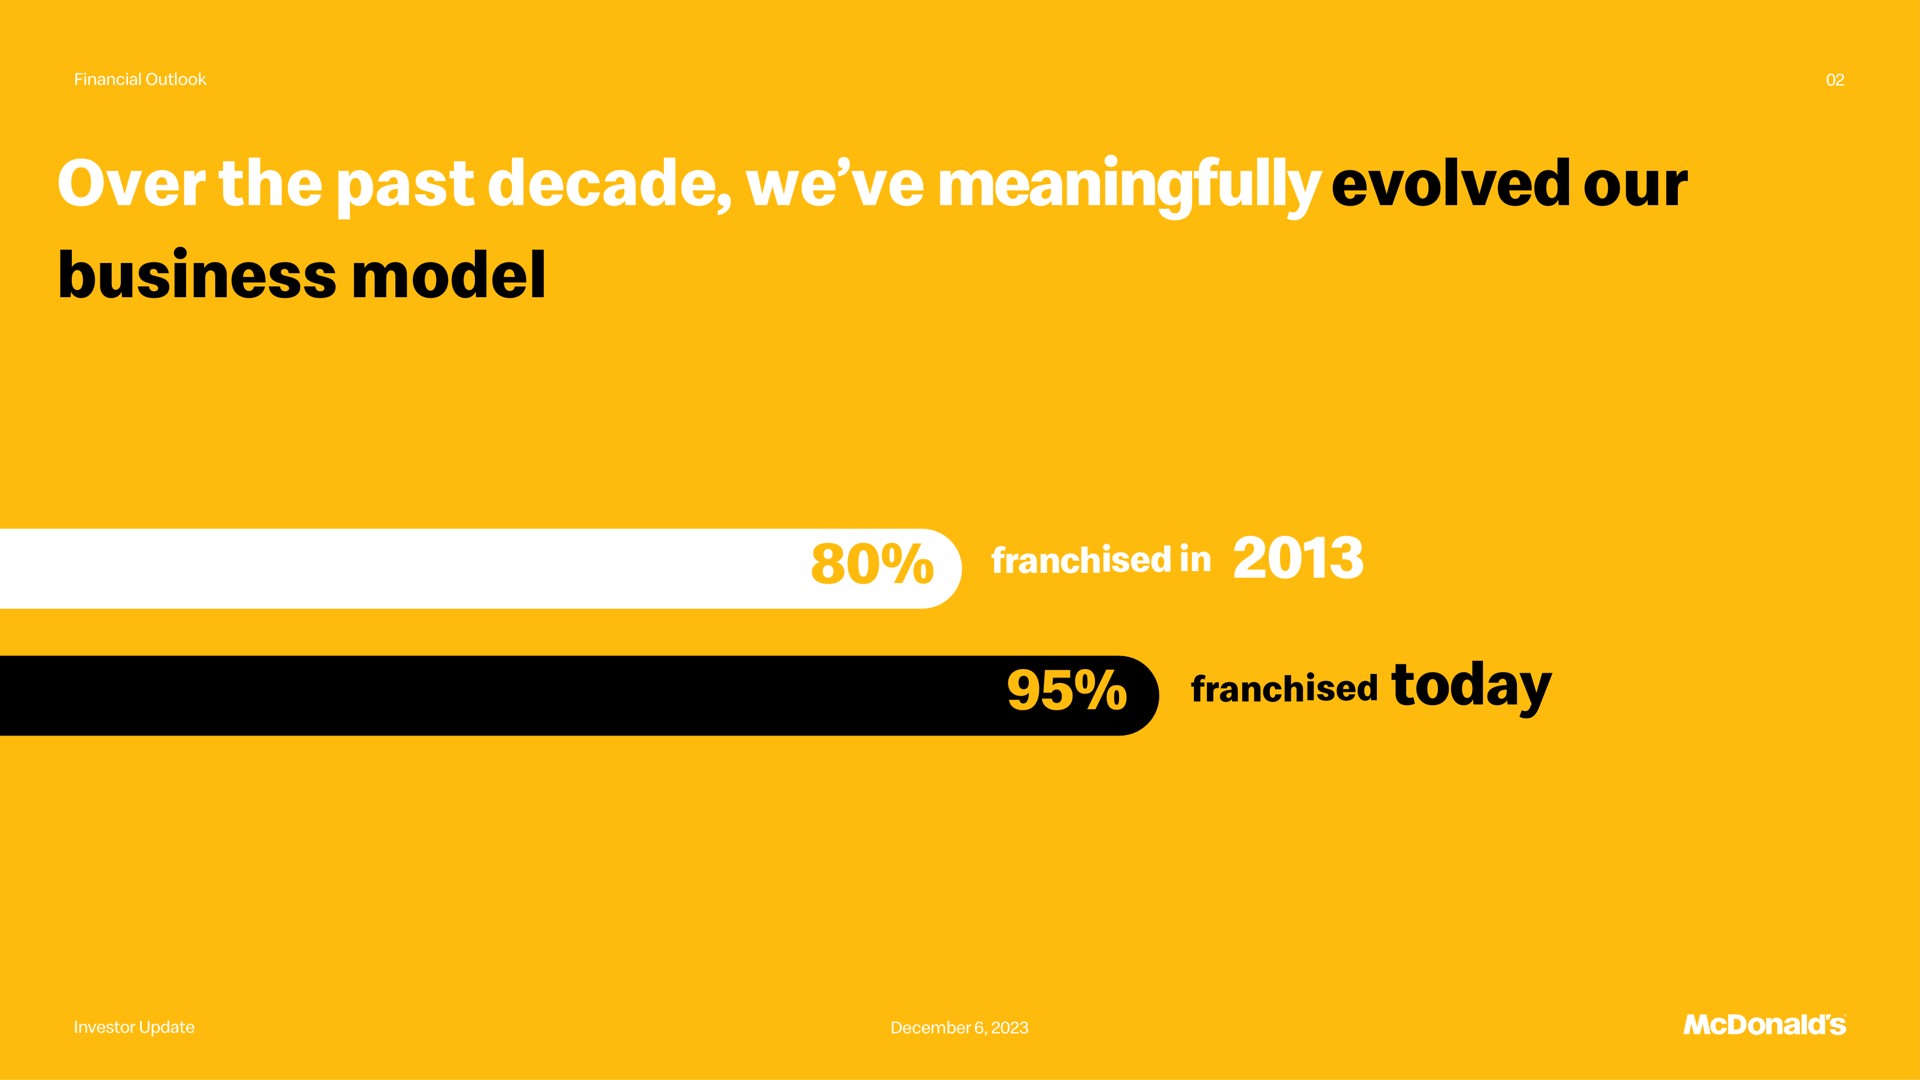 over the past decade we meaningfully evolved our business model franchised in franchised today | McDonald's